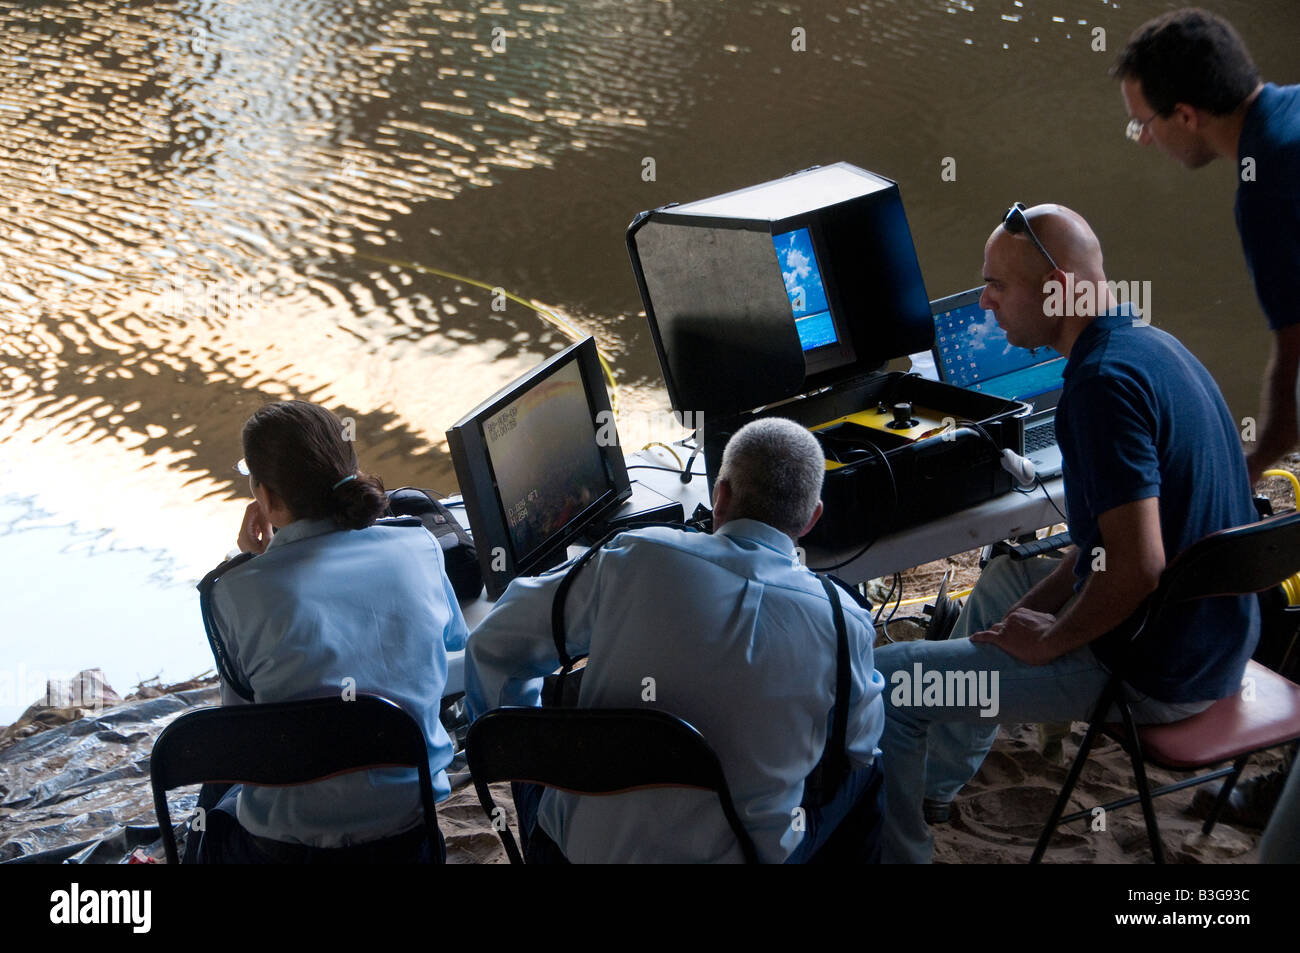 Israeli police investigators search the Yarkon River for findings related to missing girl Rose Pizem believed to be murdered. Tel Aviv Israel Stock Photo